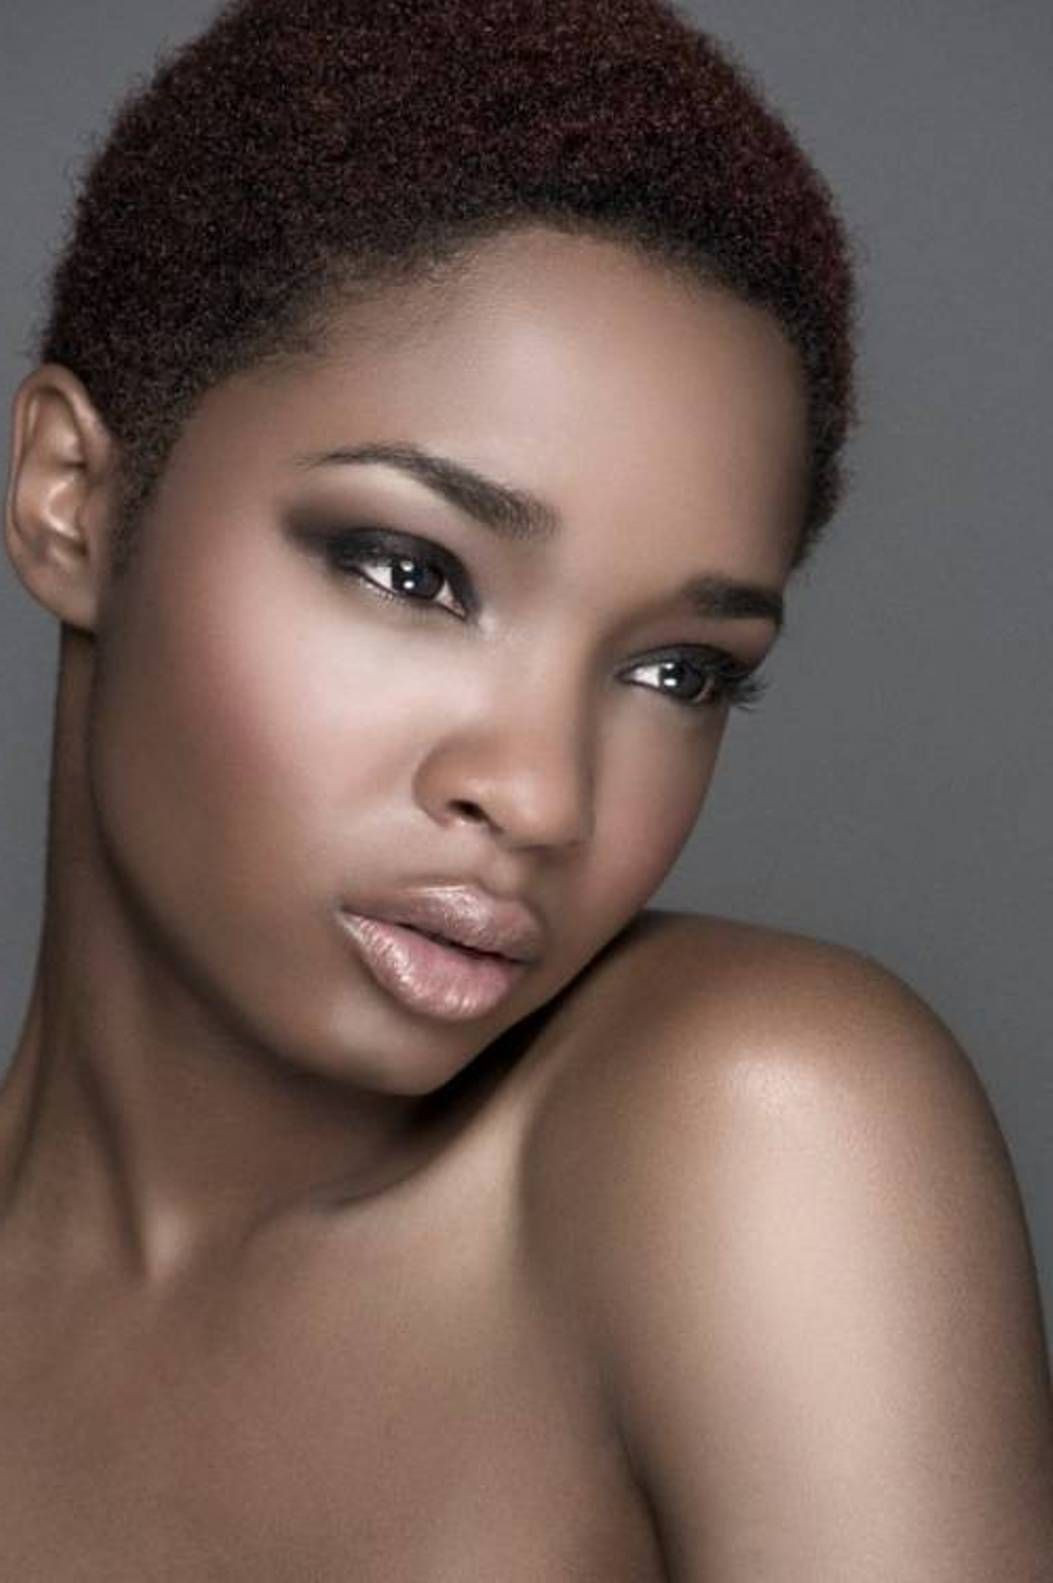 Short Hairstyles For African American Females
 Pin on black hair s beautiful